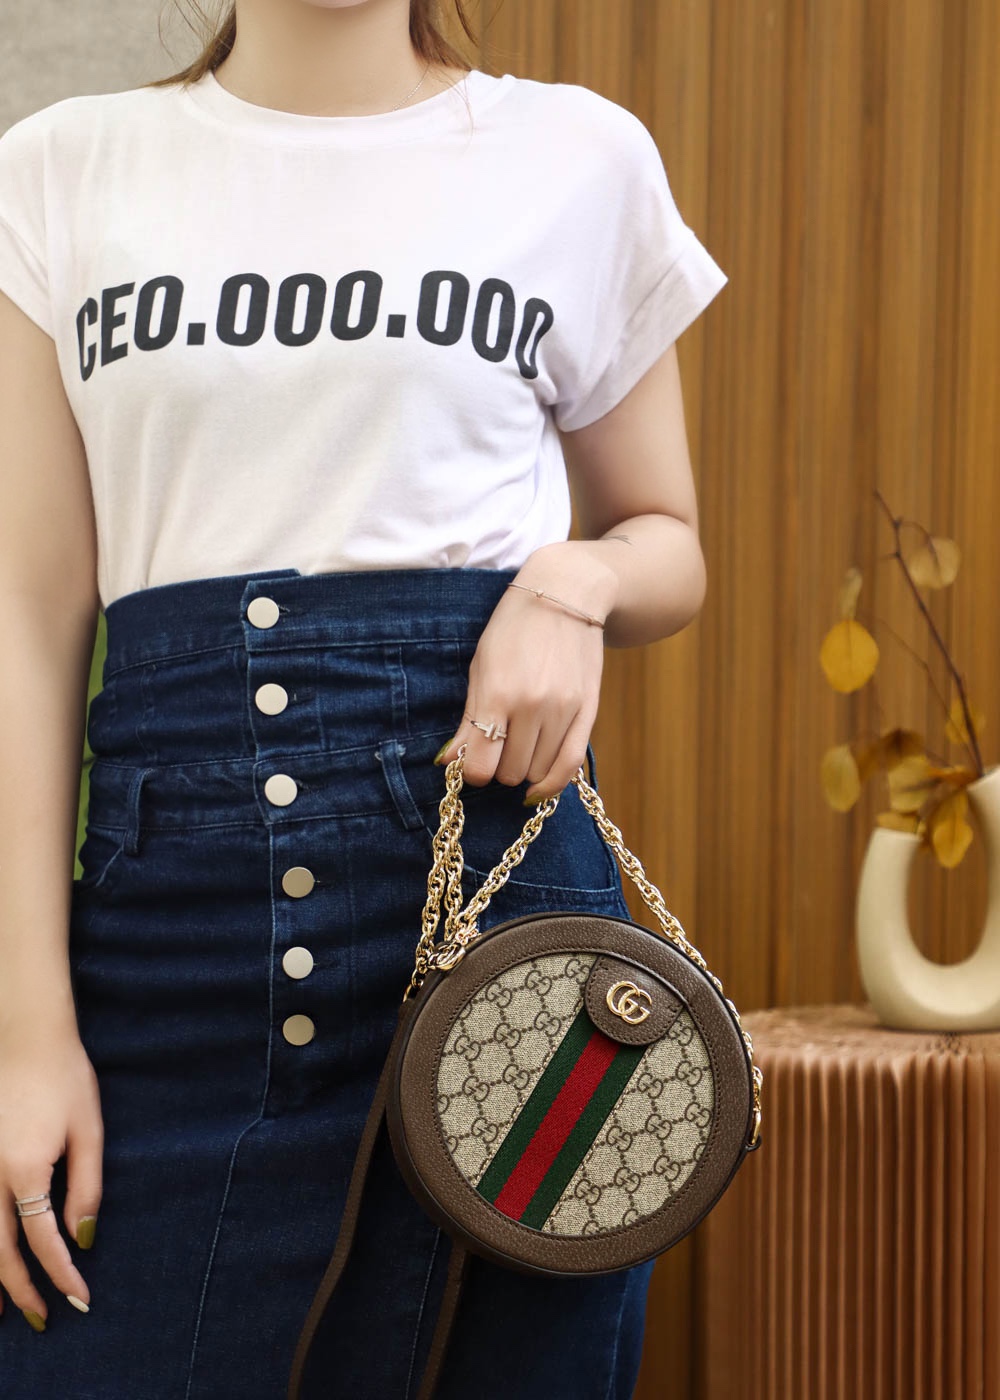 GUCCI 550618 Ophidia 𝐆𝐆圆饼包